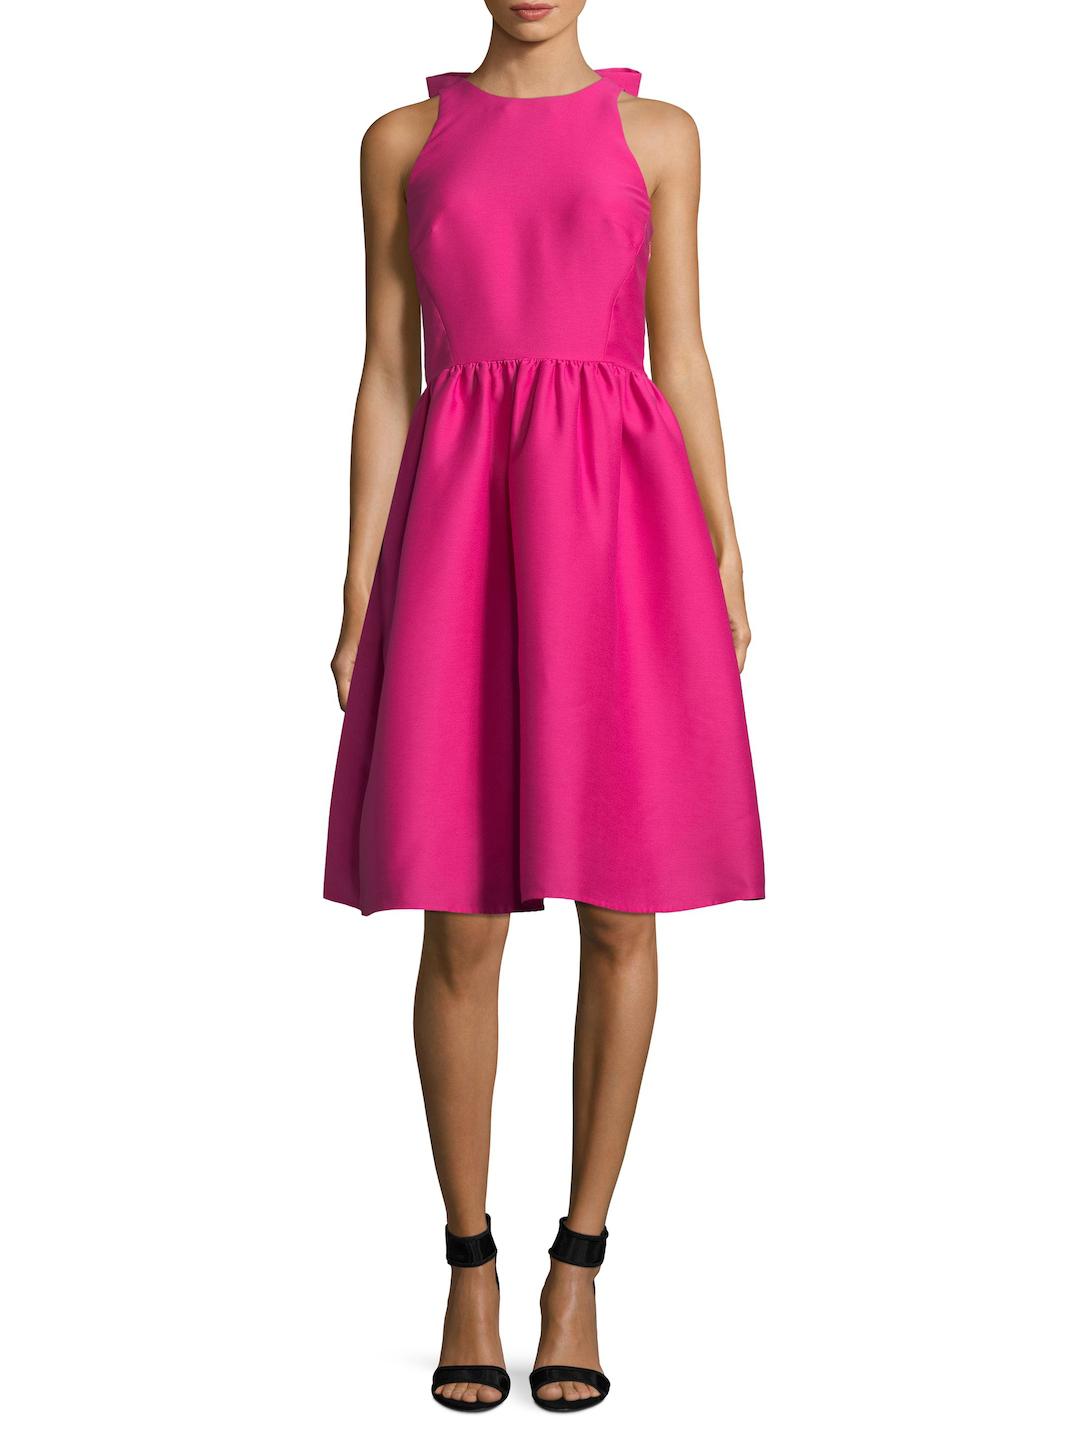 Total 70+ imagen bow back fit and flare dress kate spade - Abzlocal.mx